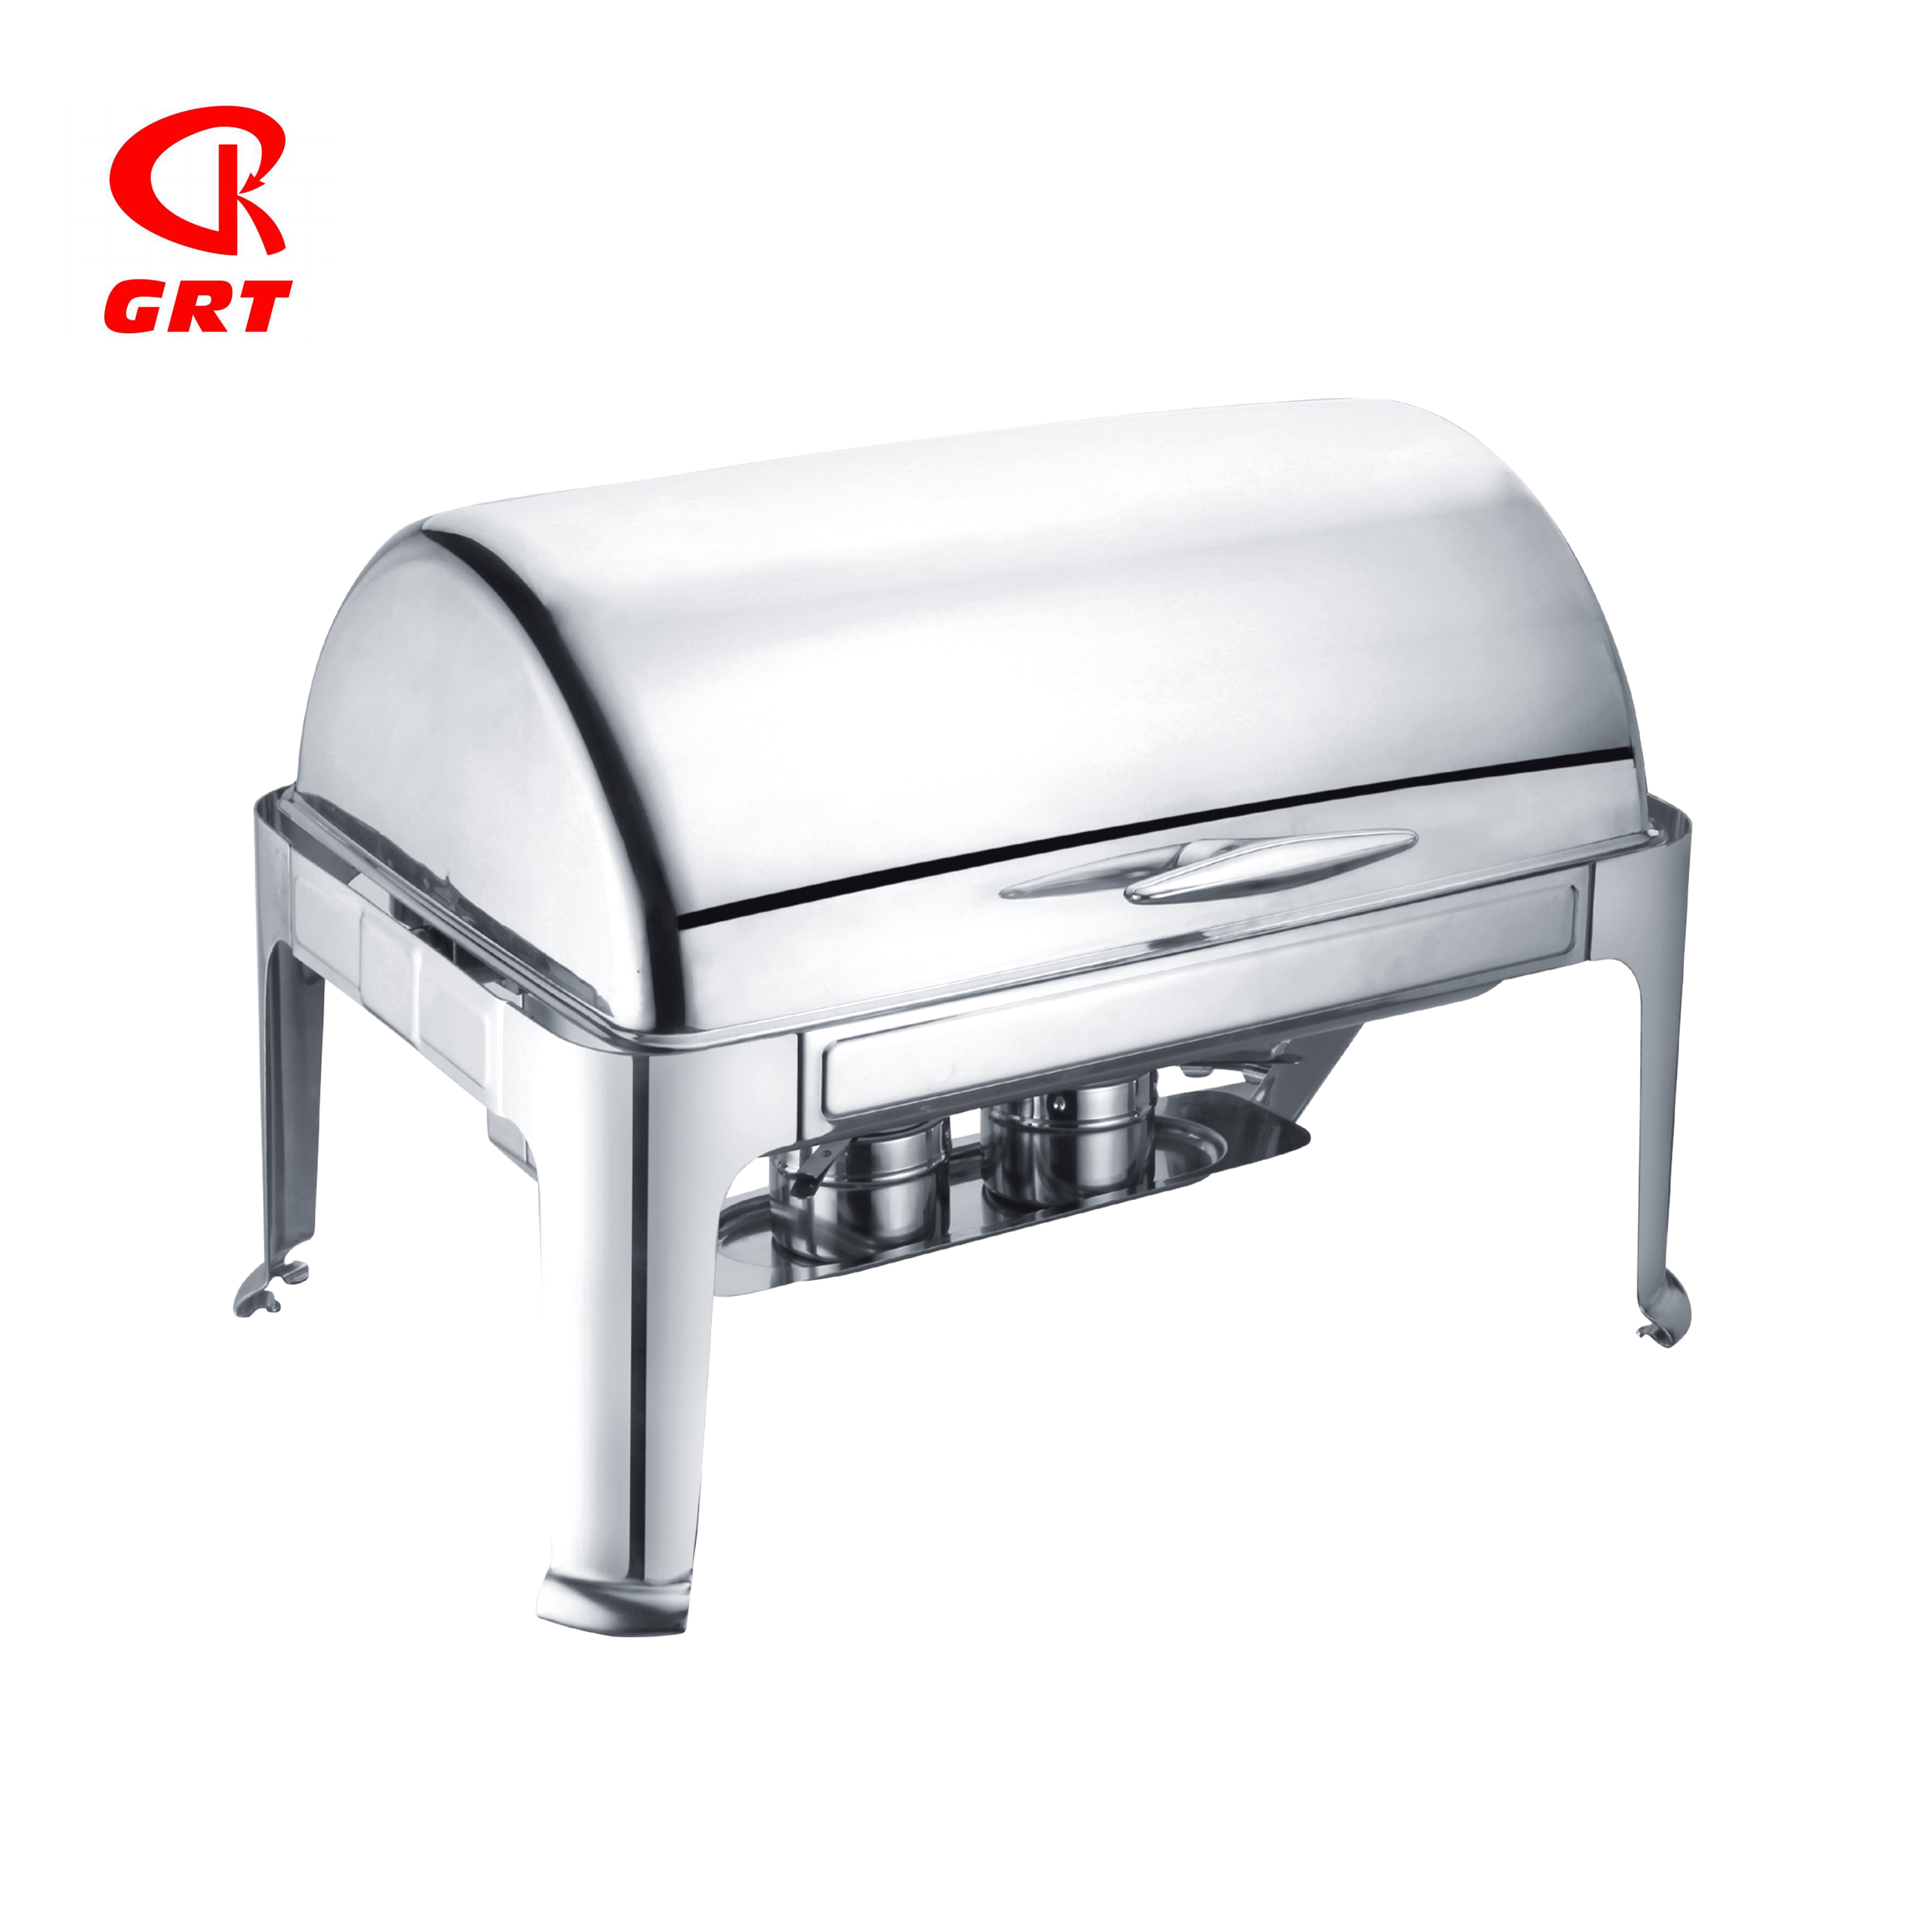 GRT-723 0.9mm Thick Stainless Steel Rectangular Chafing Dish 9L